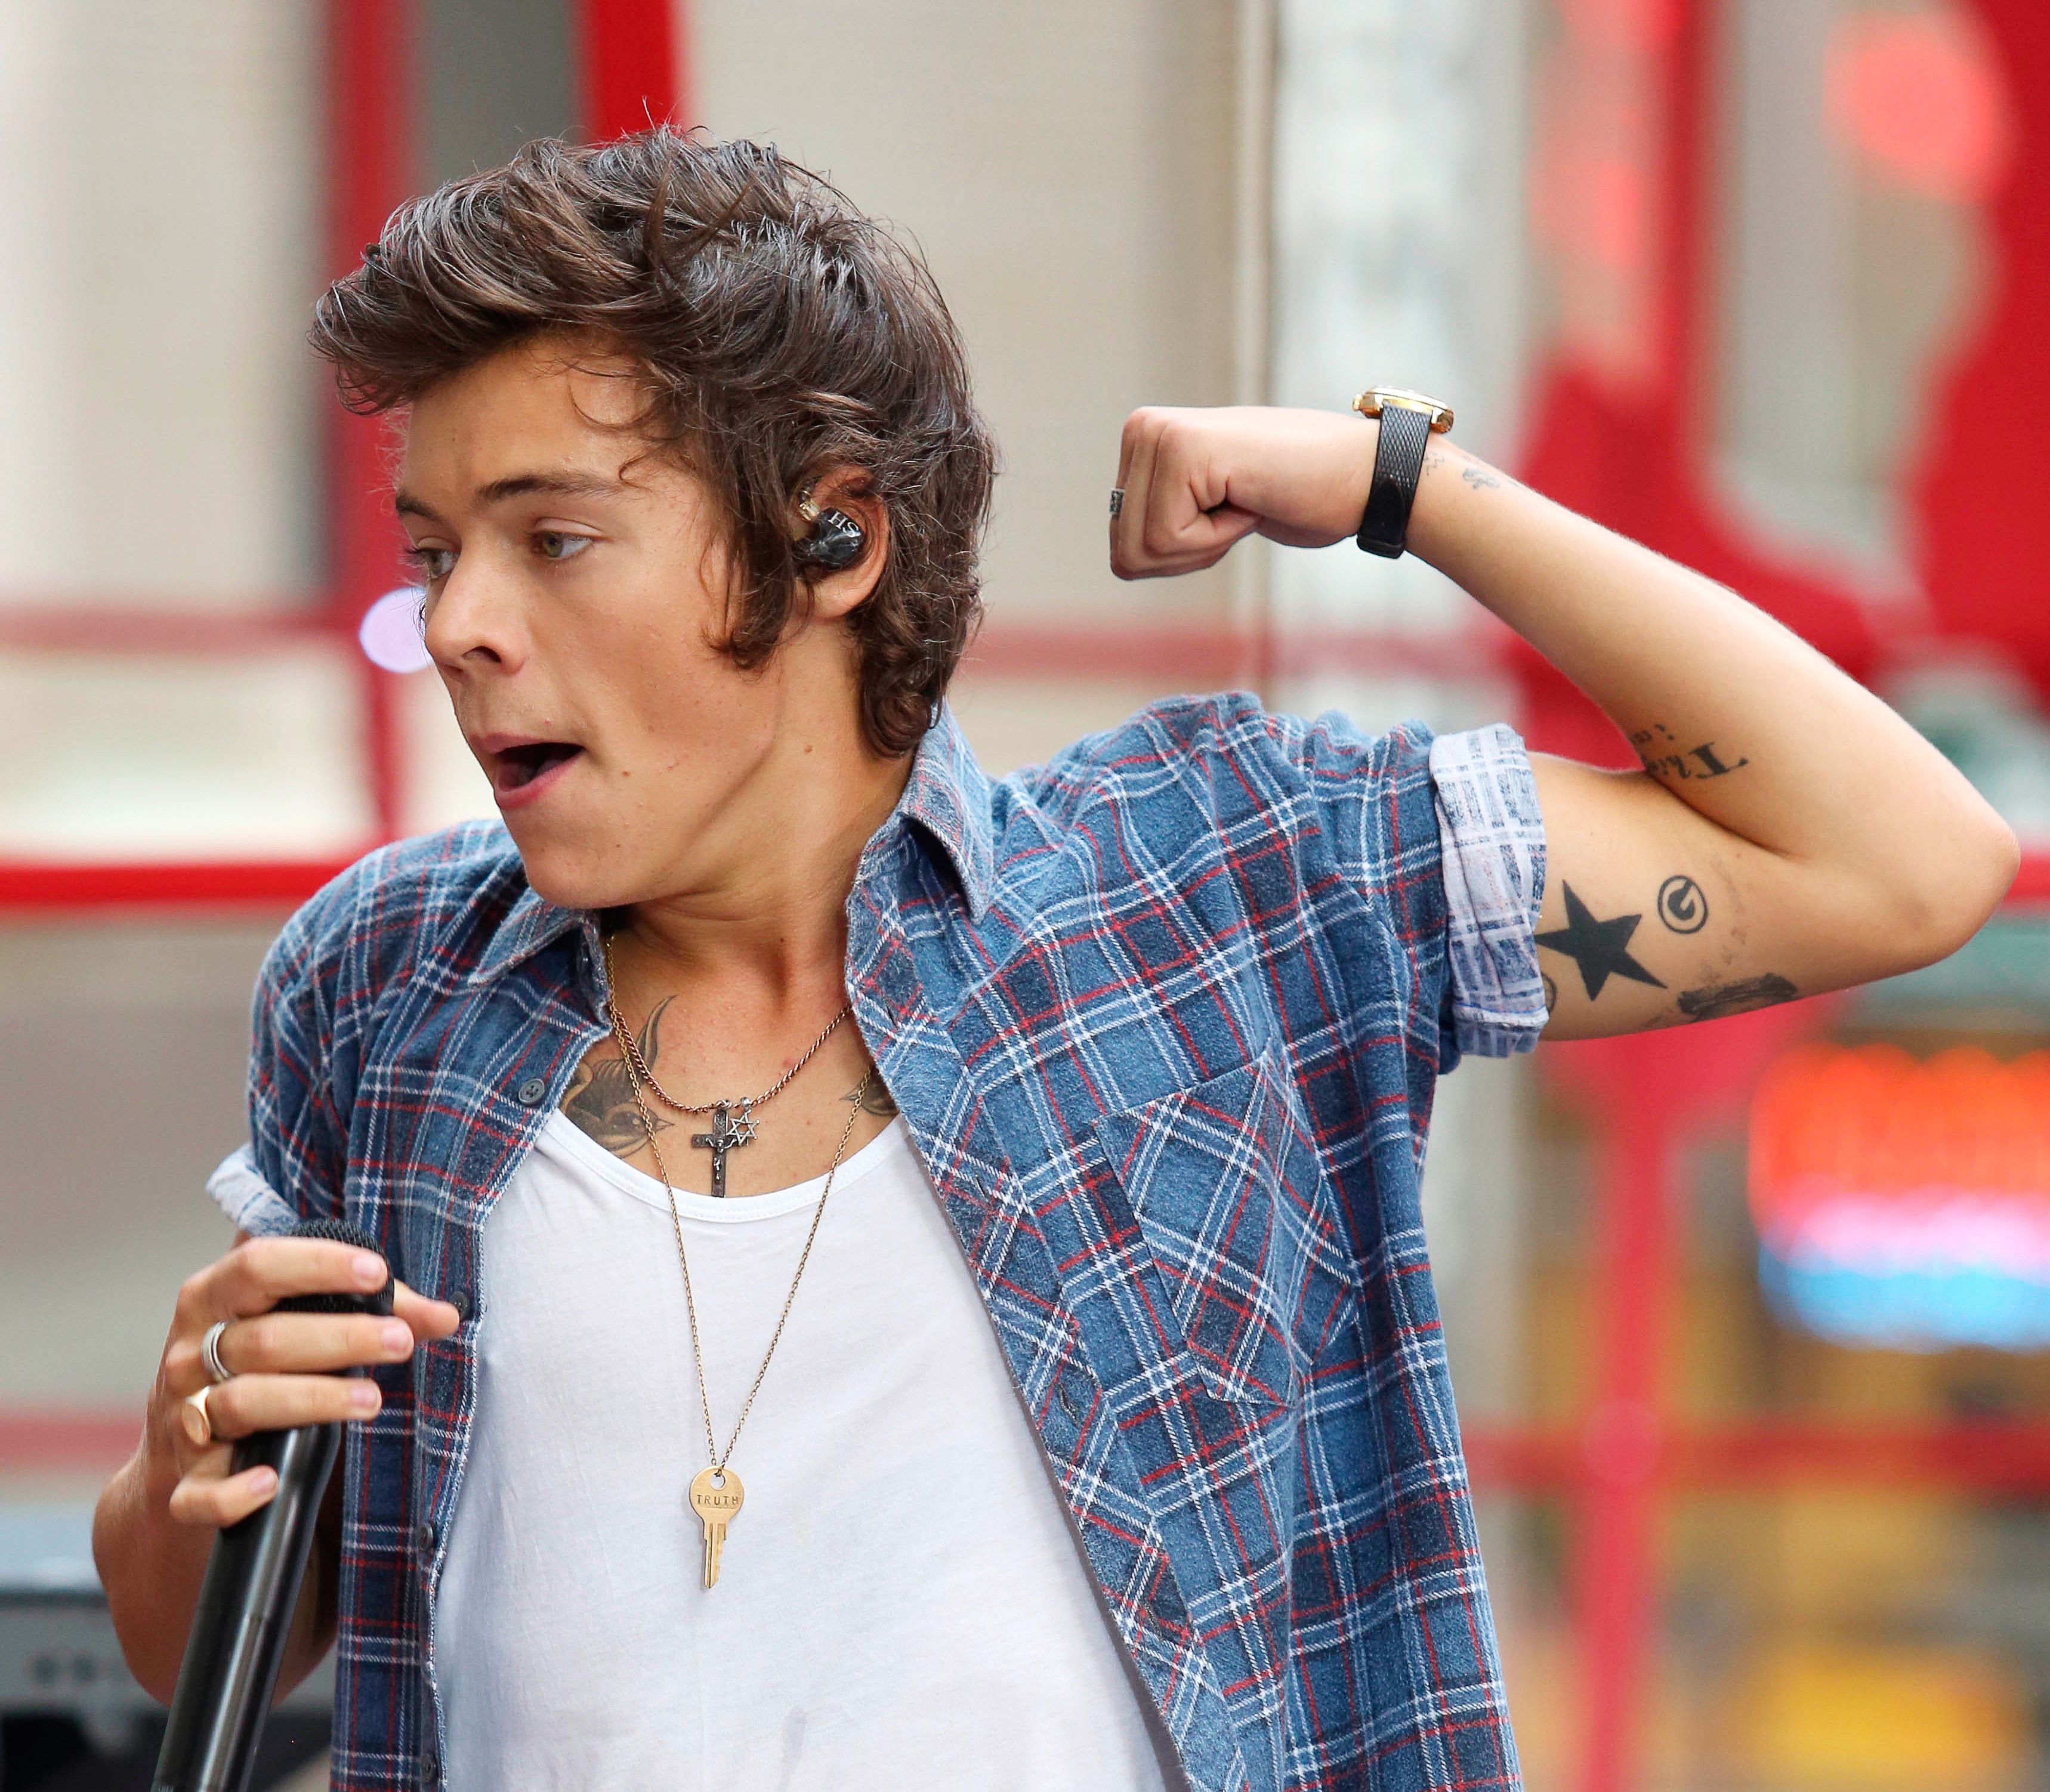 Harry Styles' 50+ Tattoos: Guide To His Ink And Their Meanings